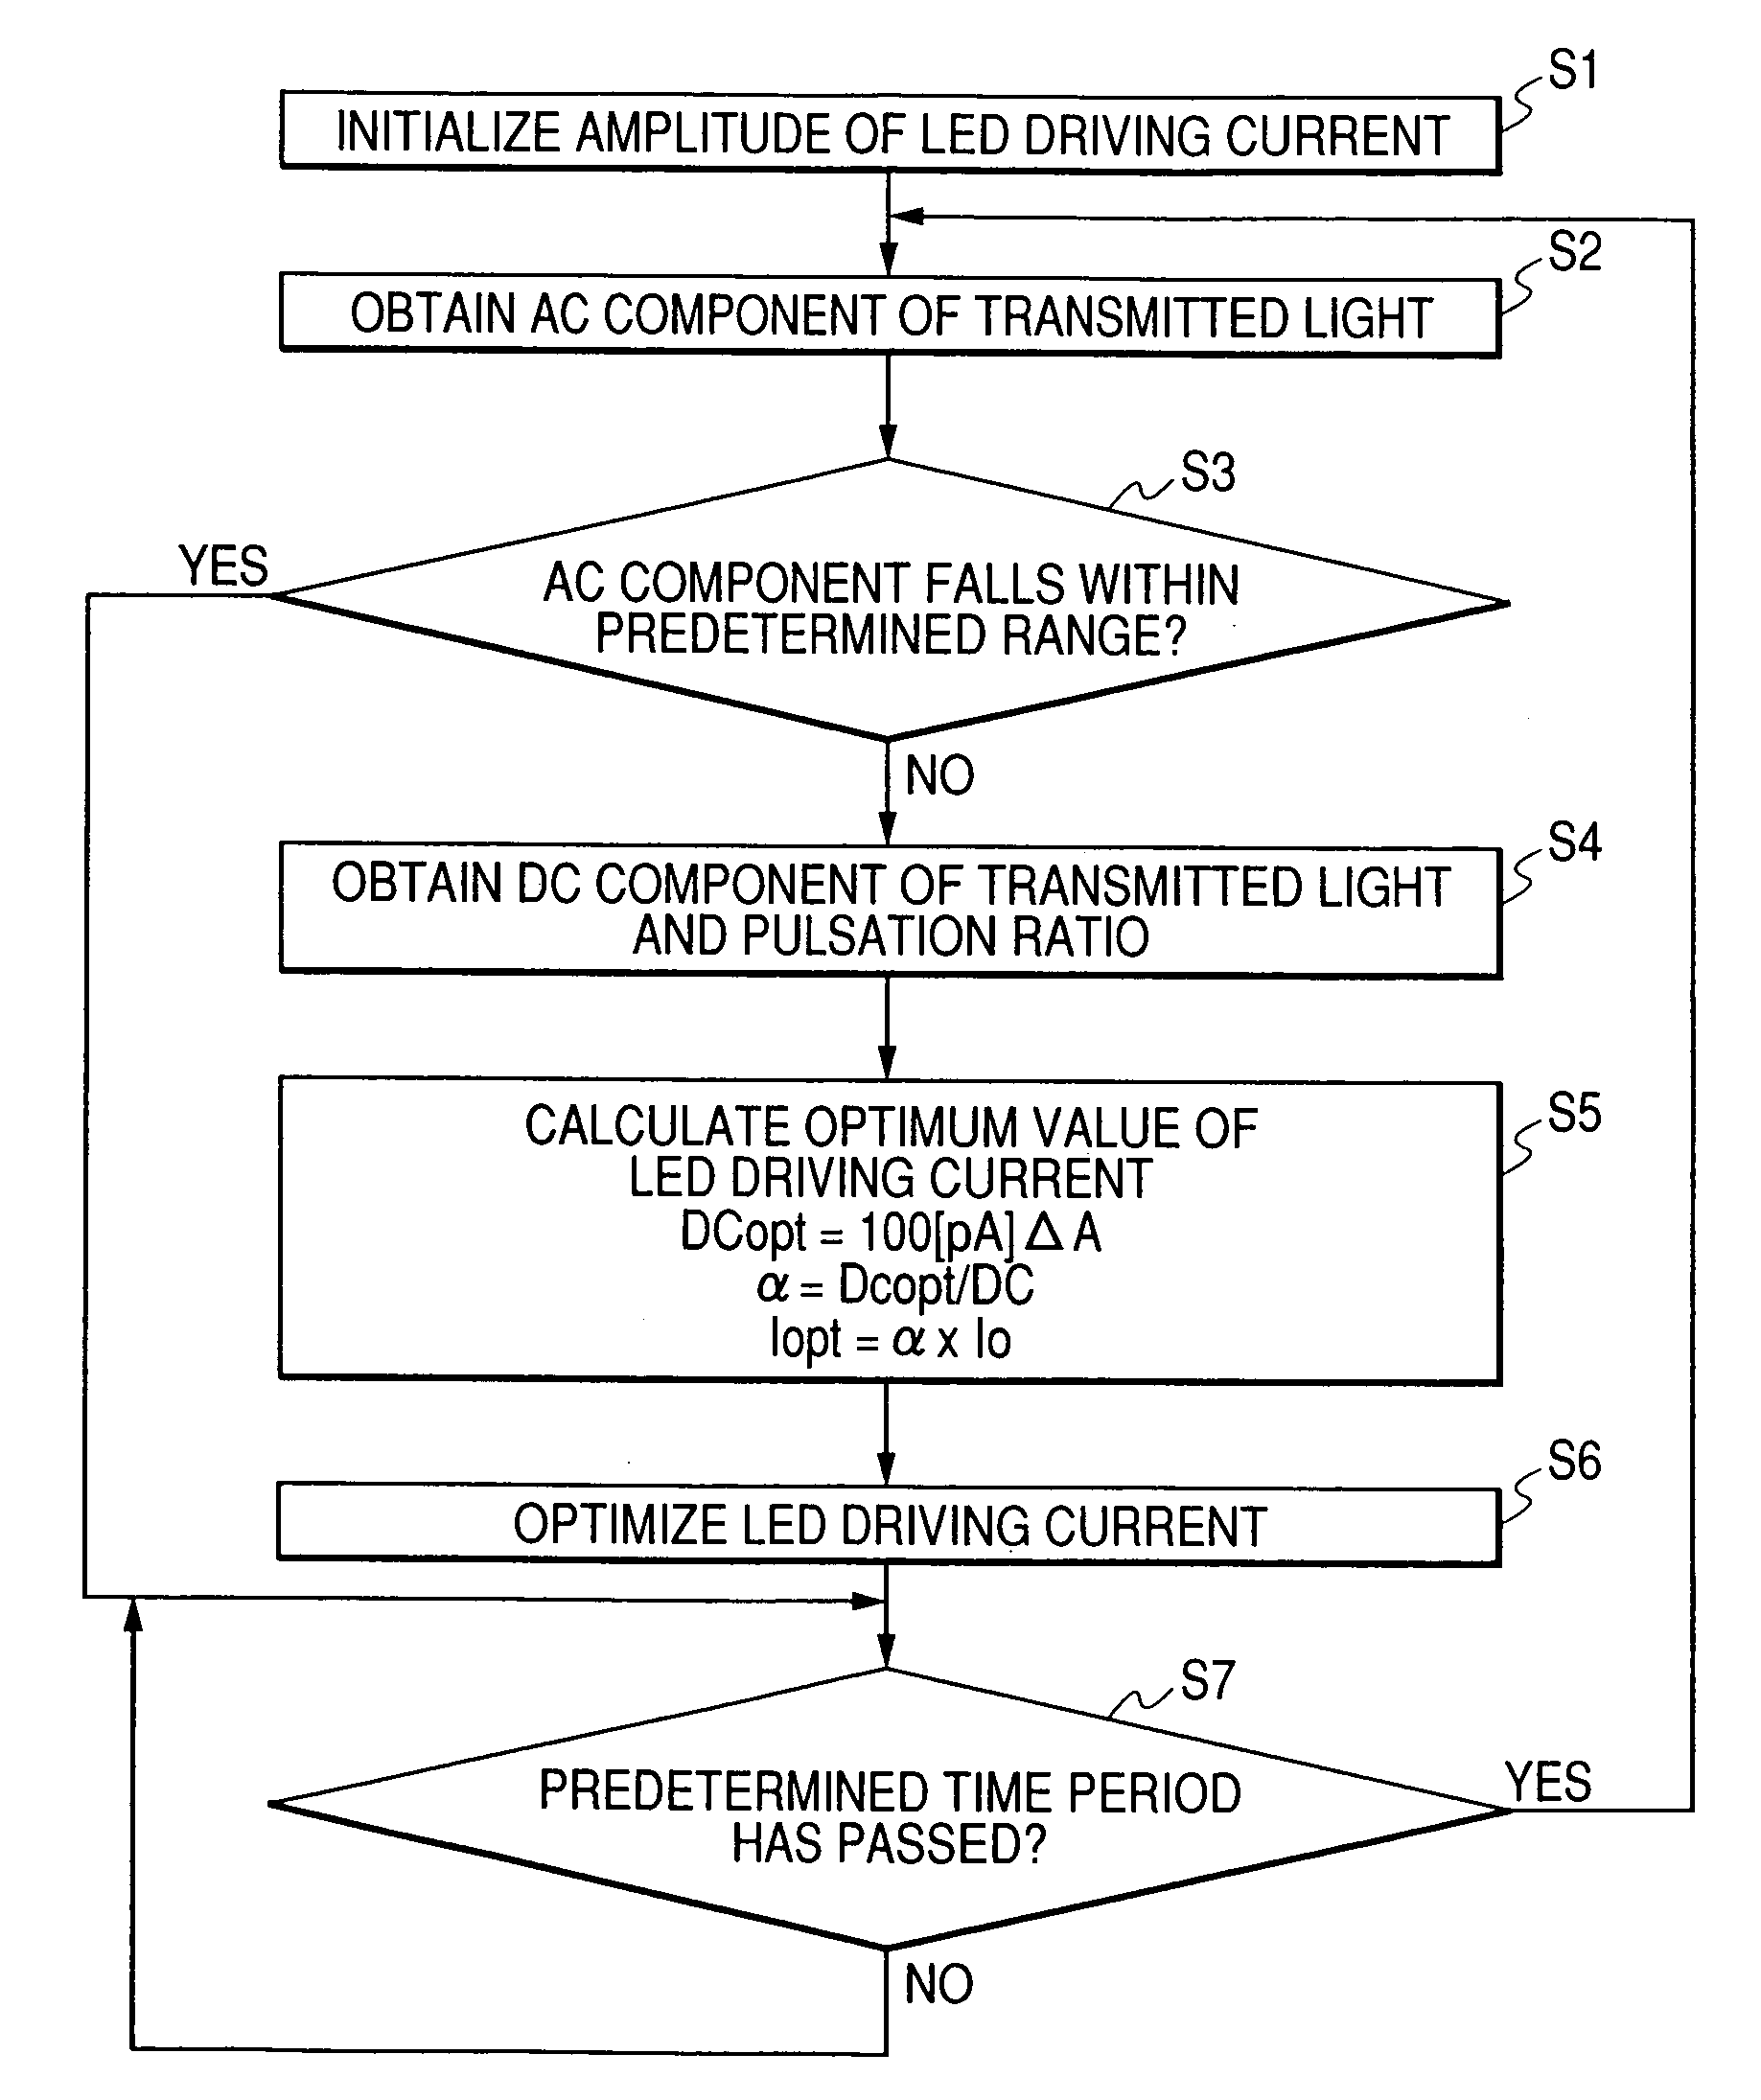 Apparatus for determining concentrations of light absorbing substances in blood